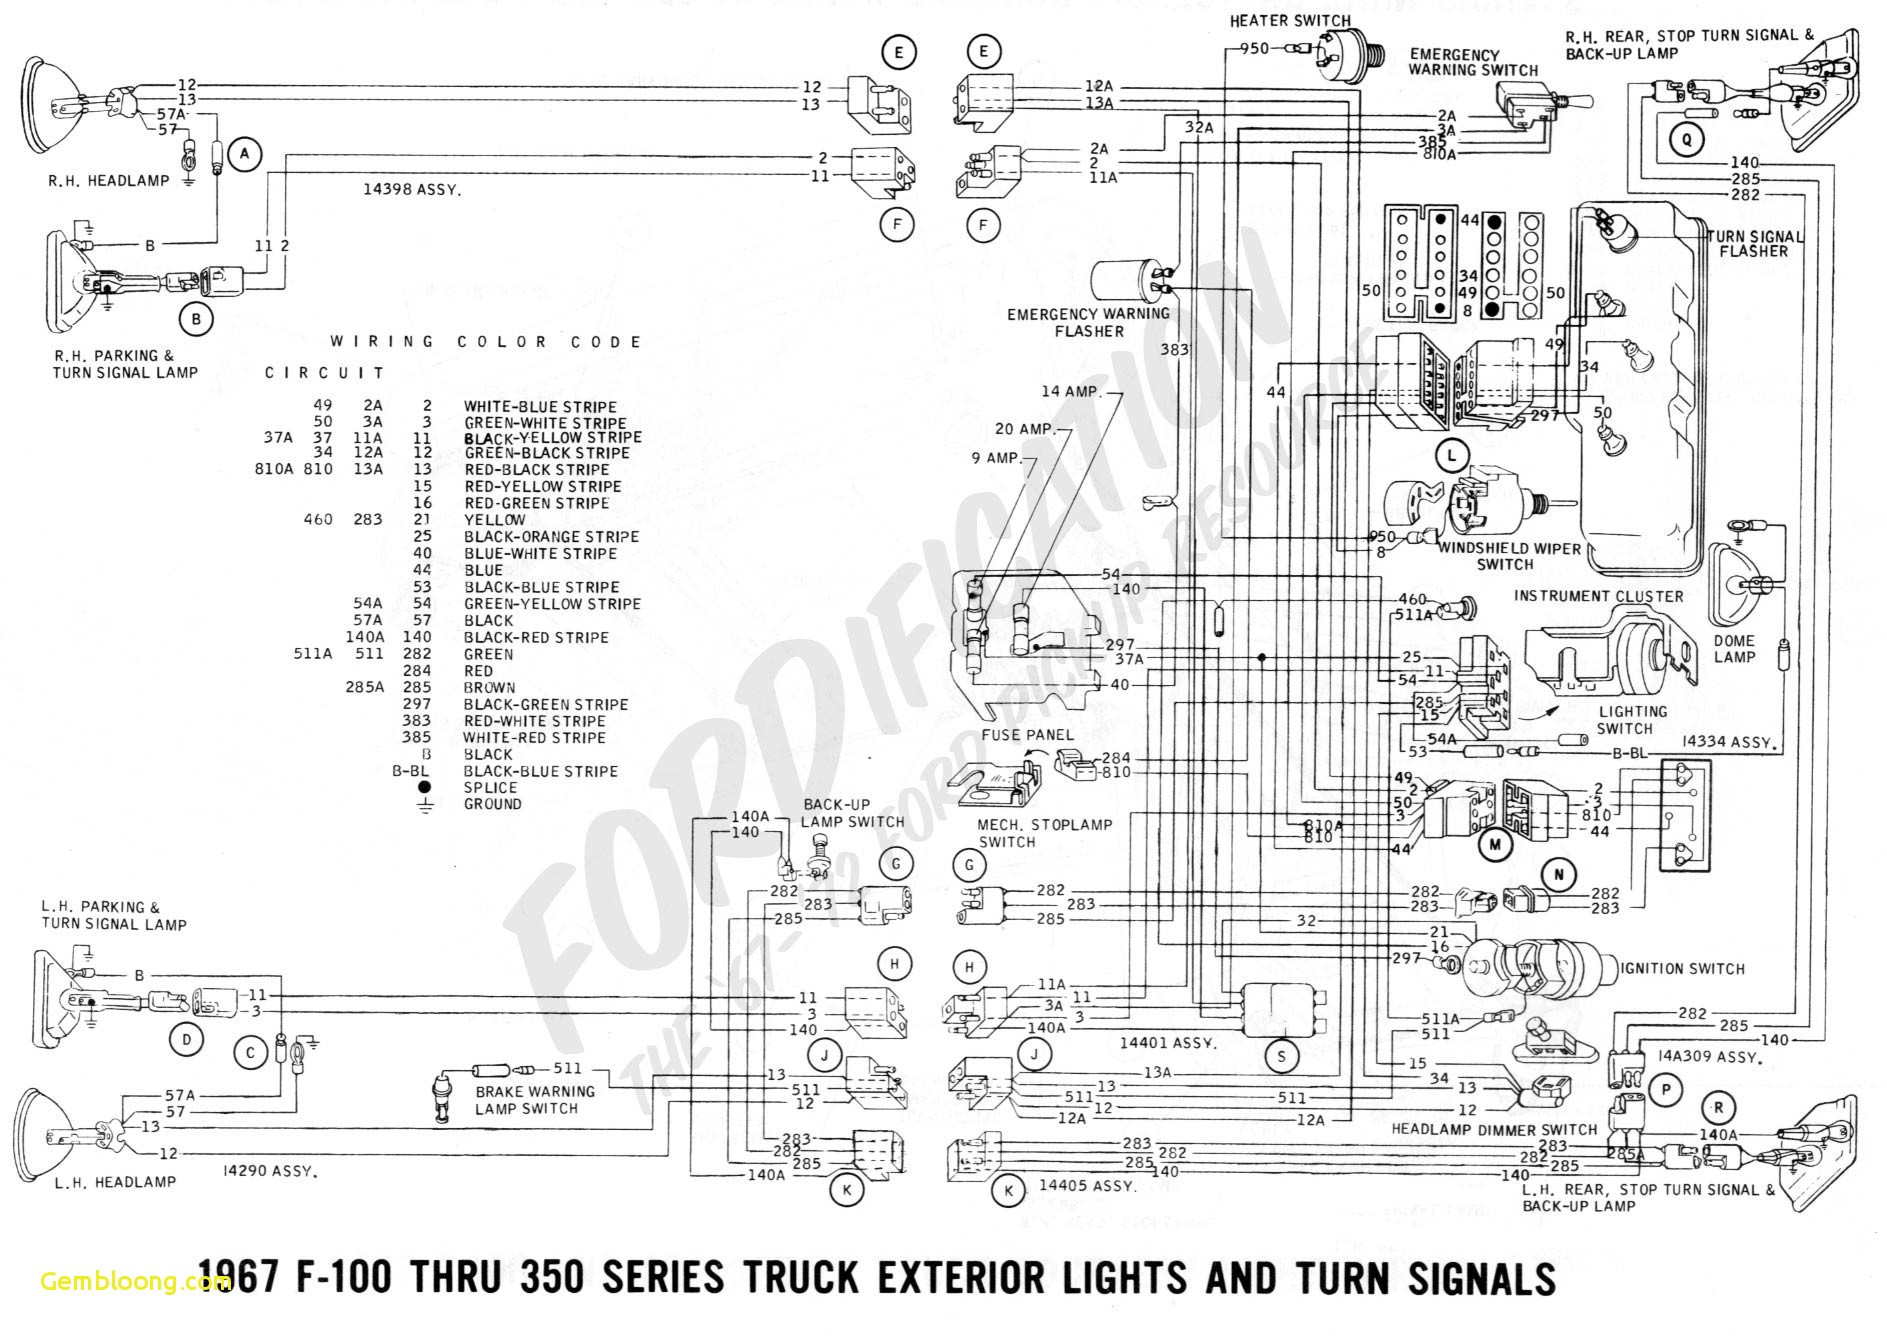 Small Engine Diagram Labeled 94 ford Pickup Wiring Diagram Another Blog About Wiring Diagram • Of Small Engine Diagram Labeled